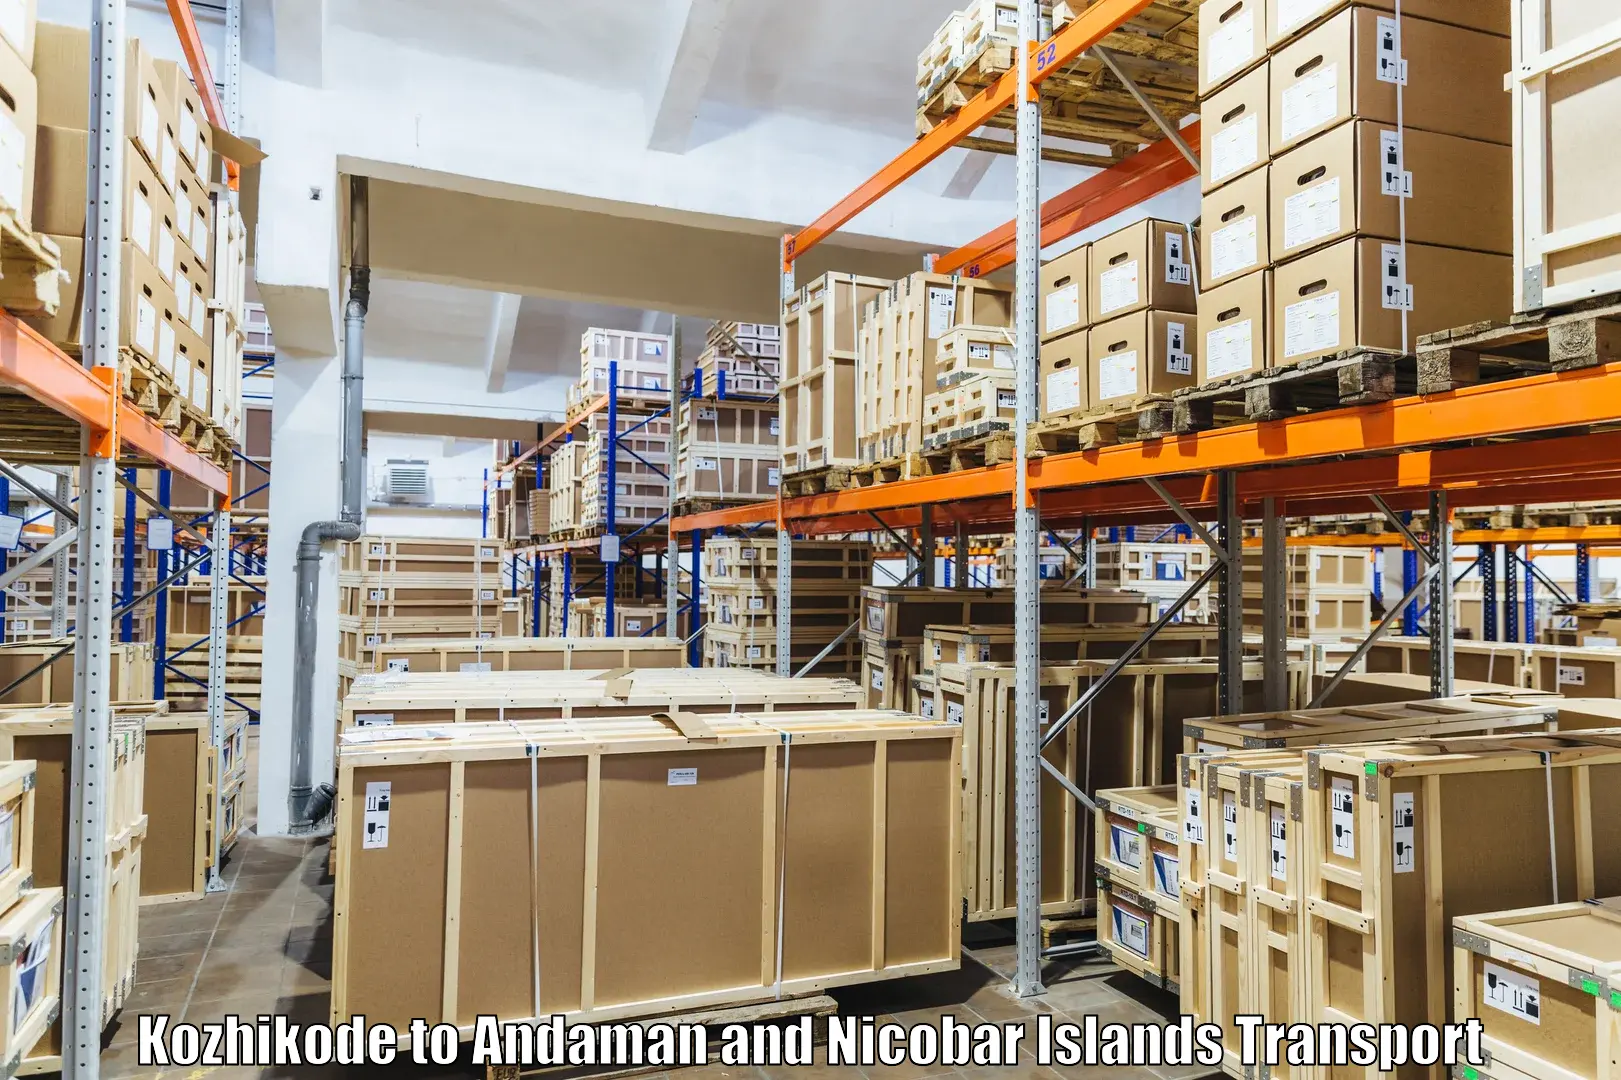 Truck transport companies in India Kozhikode to Andaman and Nicobar Islands